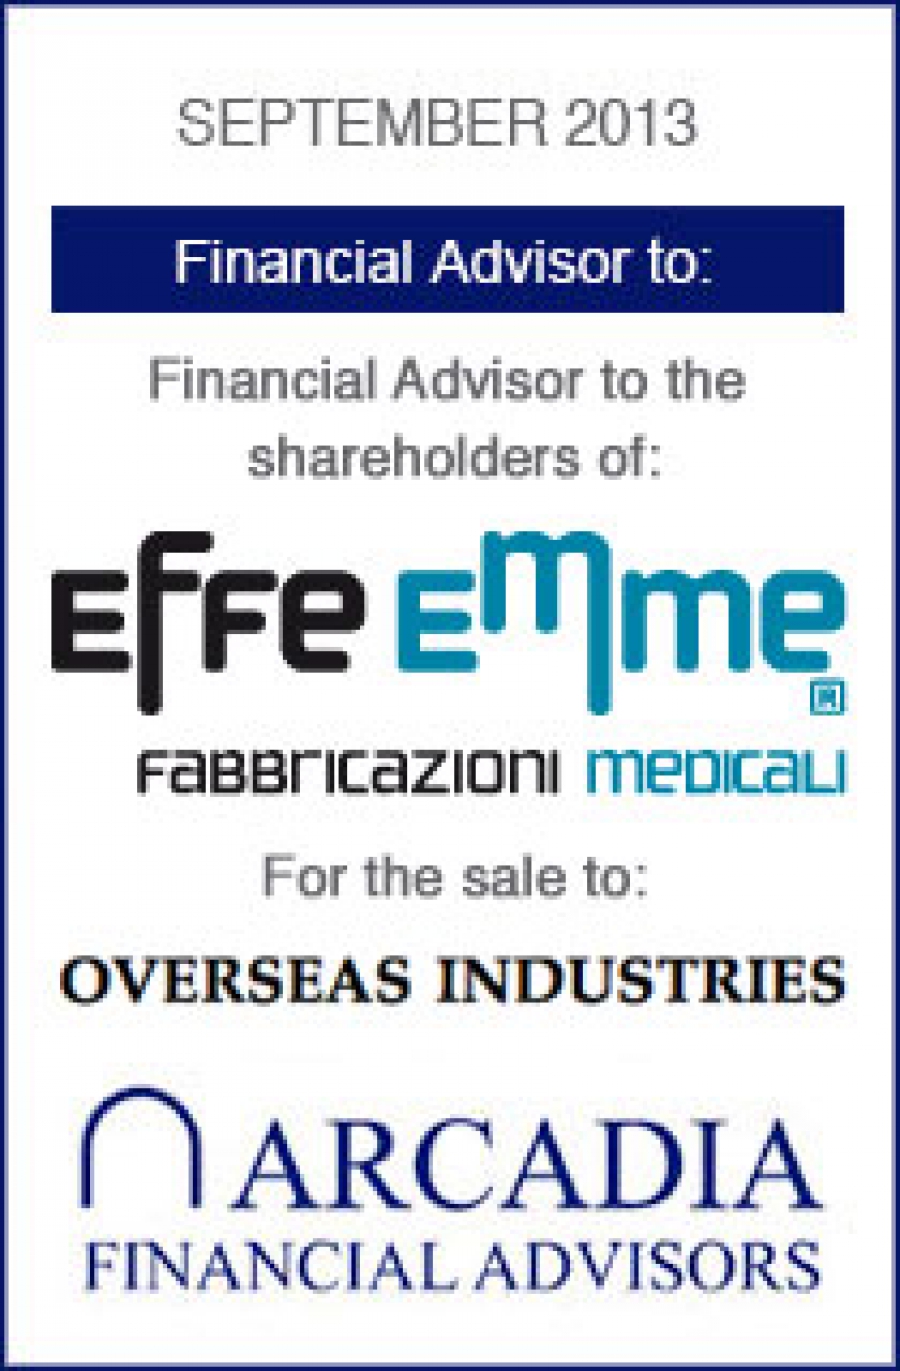 Transaction completed with Effe Emme